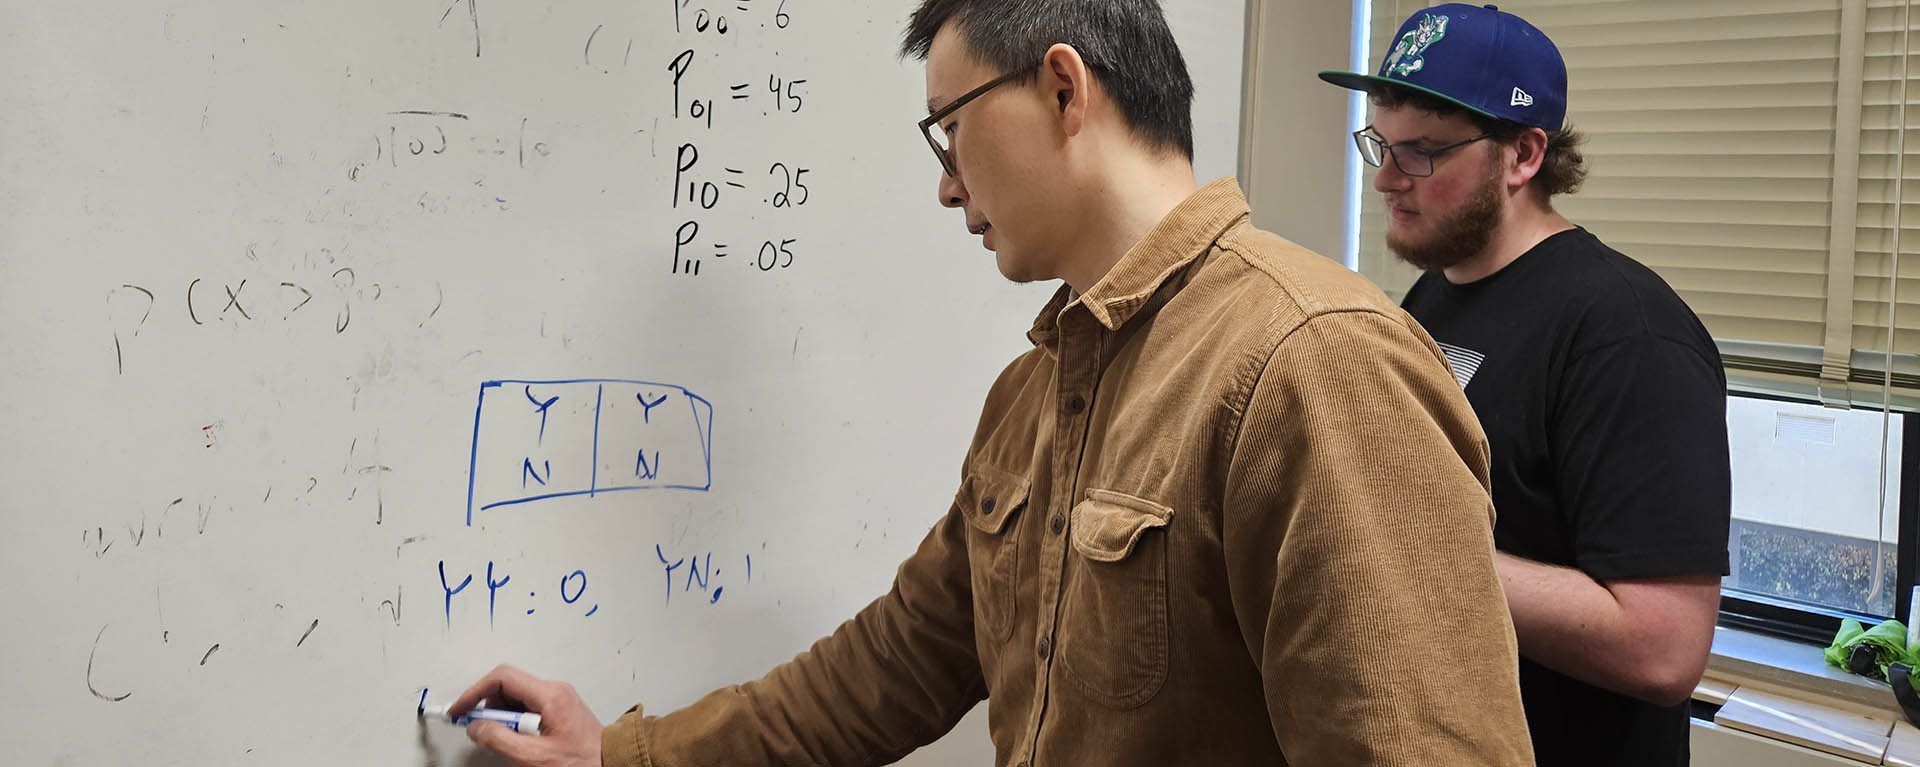 A math professor writes an equation on a white board while a student looks on.